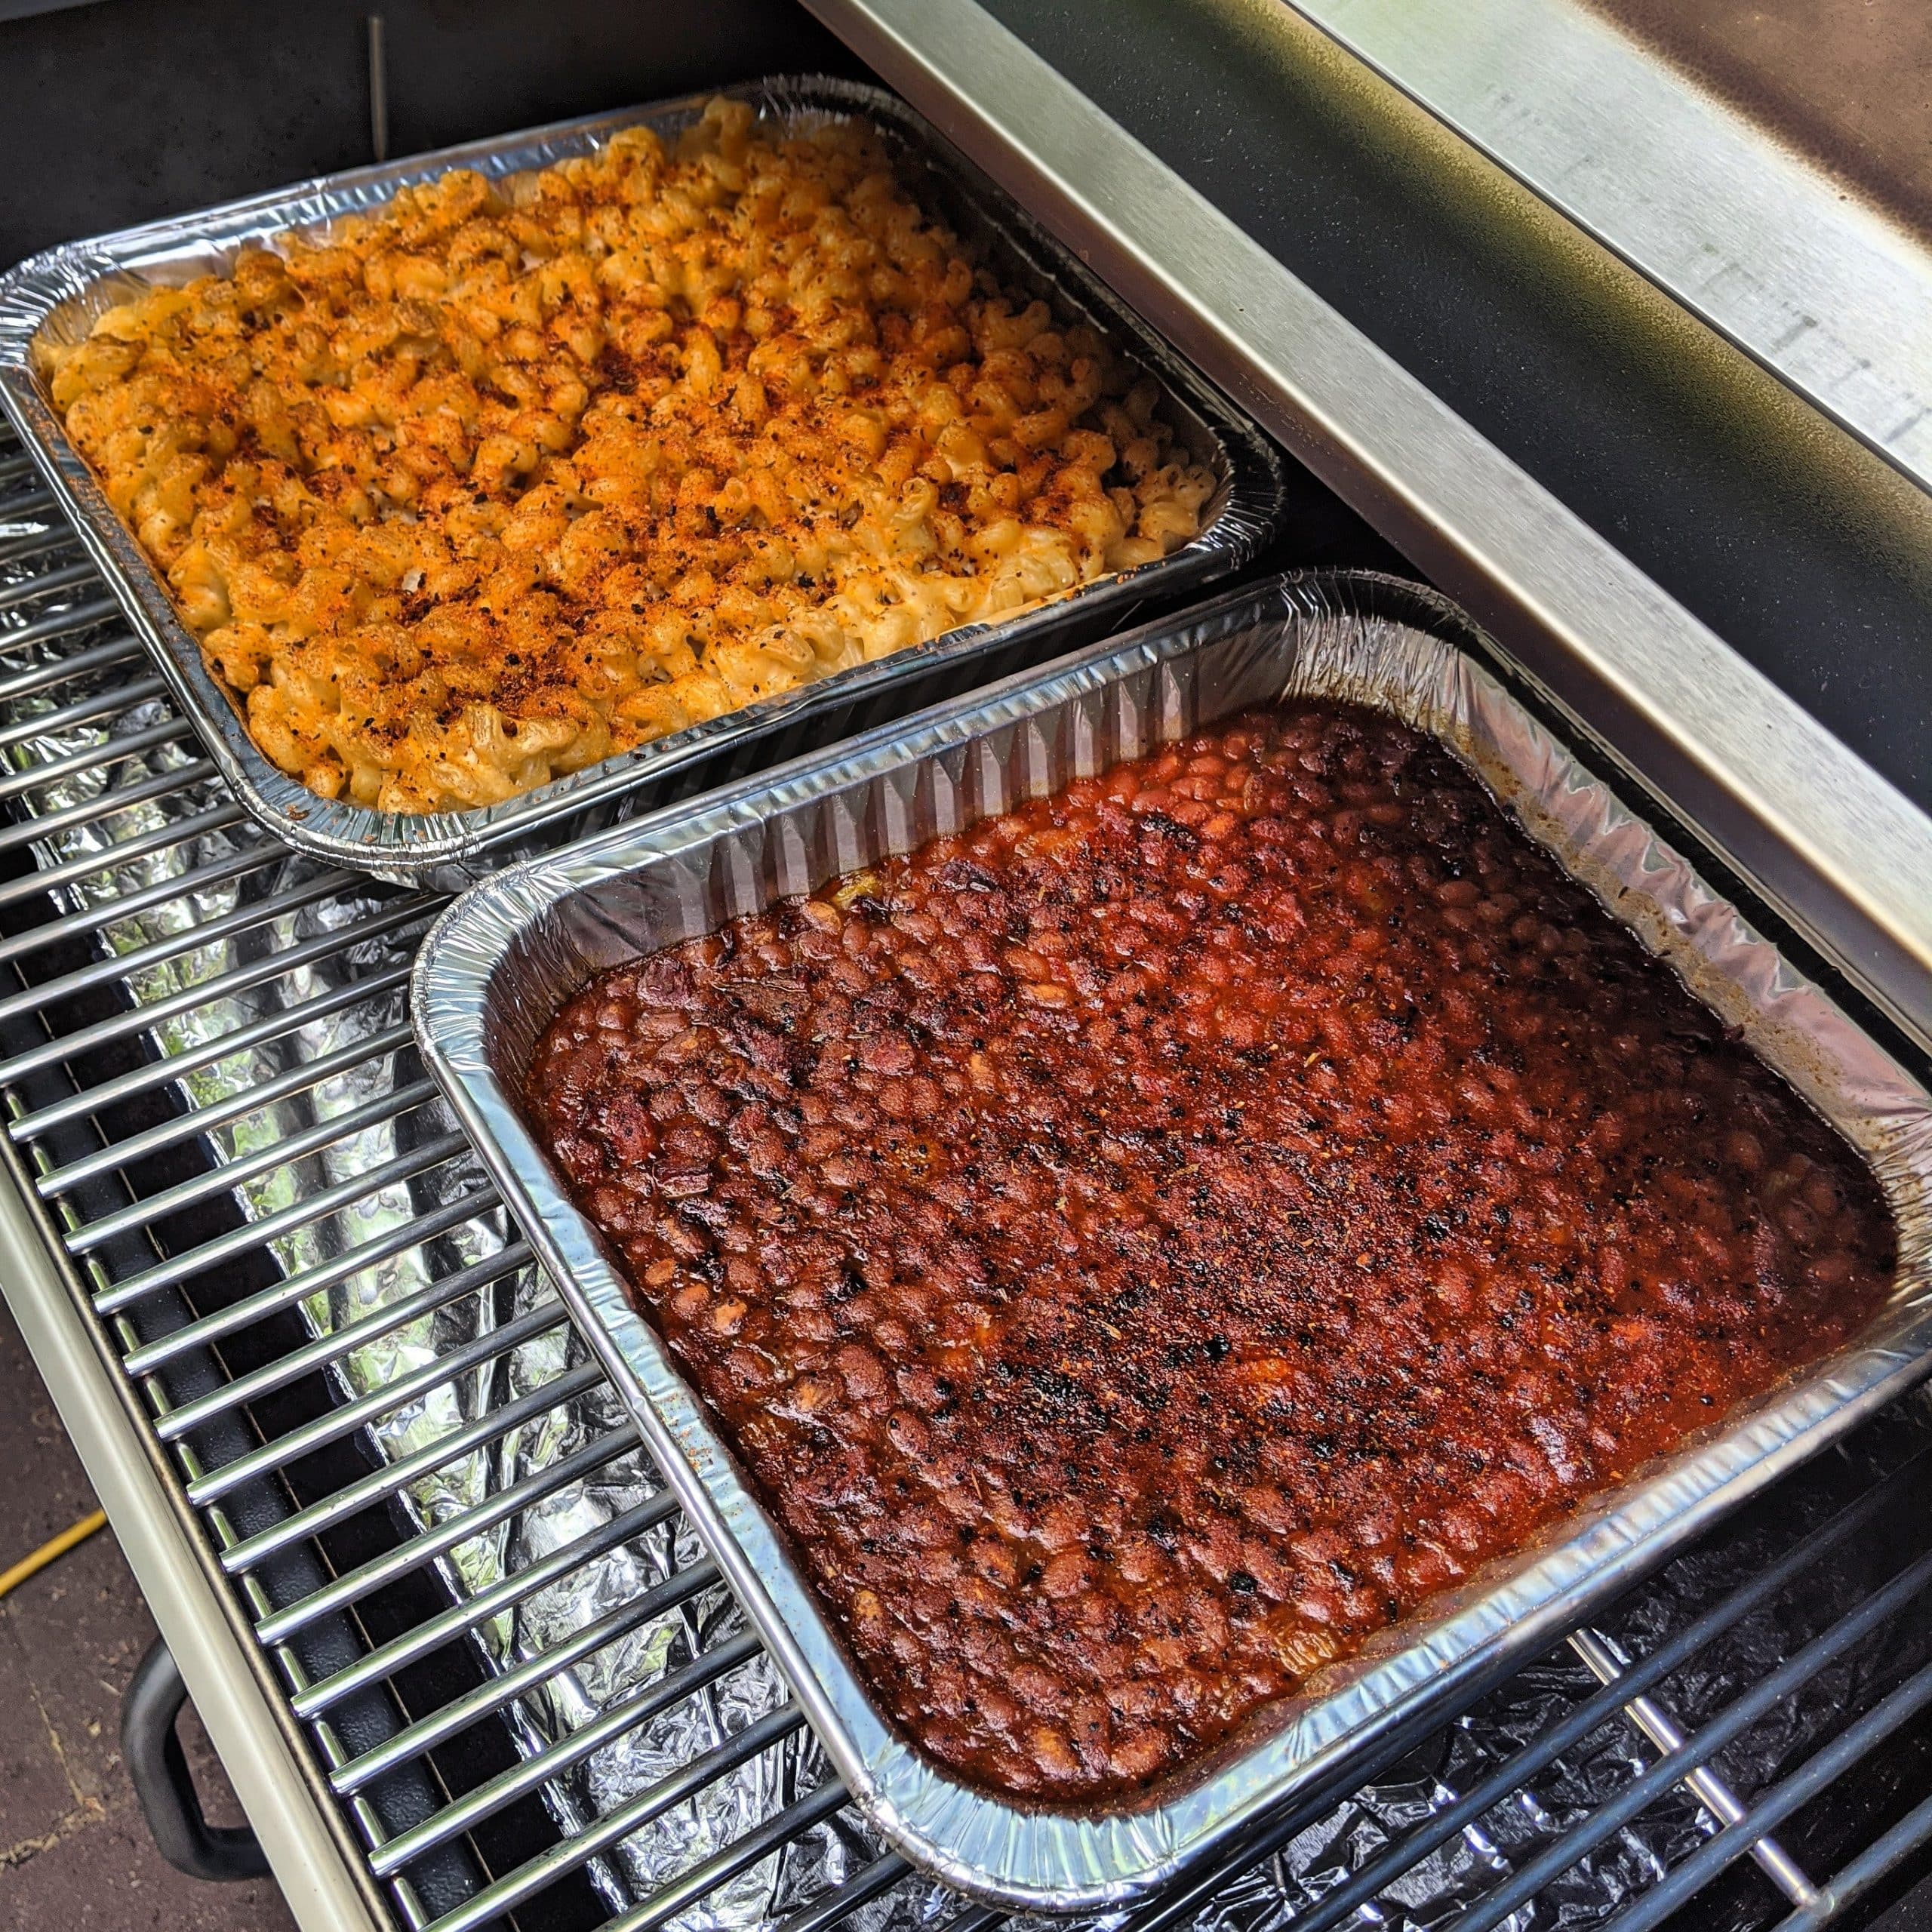 4 cheese mac and cheese and chopped brisket BBQ baked beans on the ...